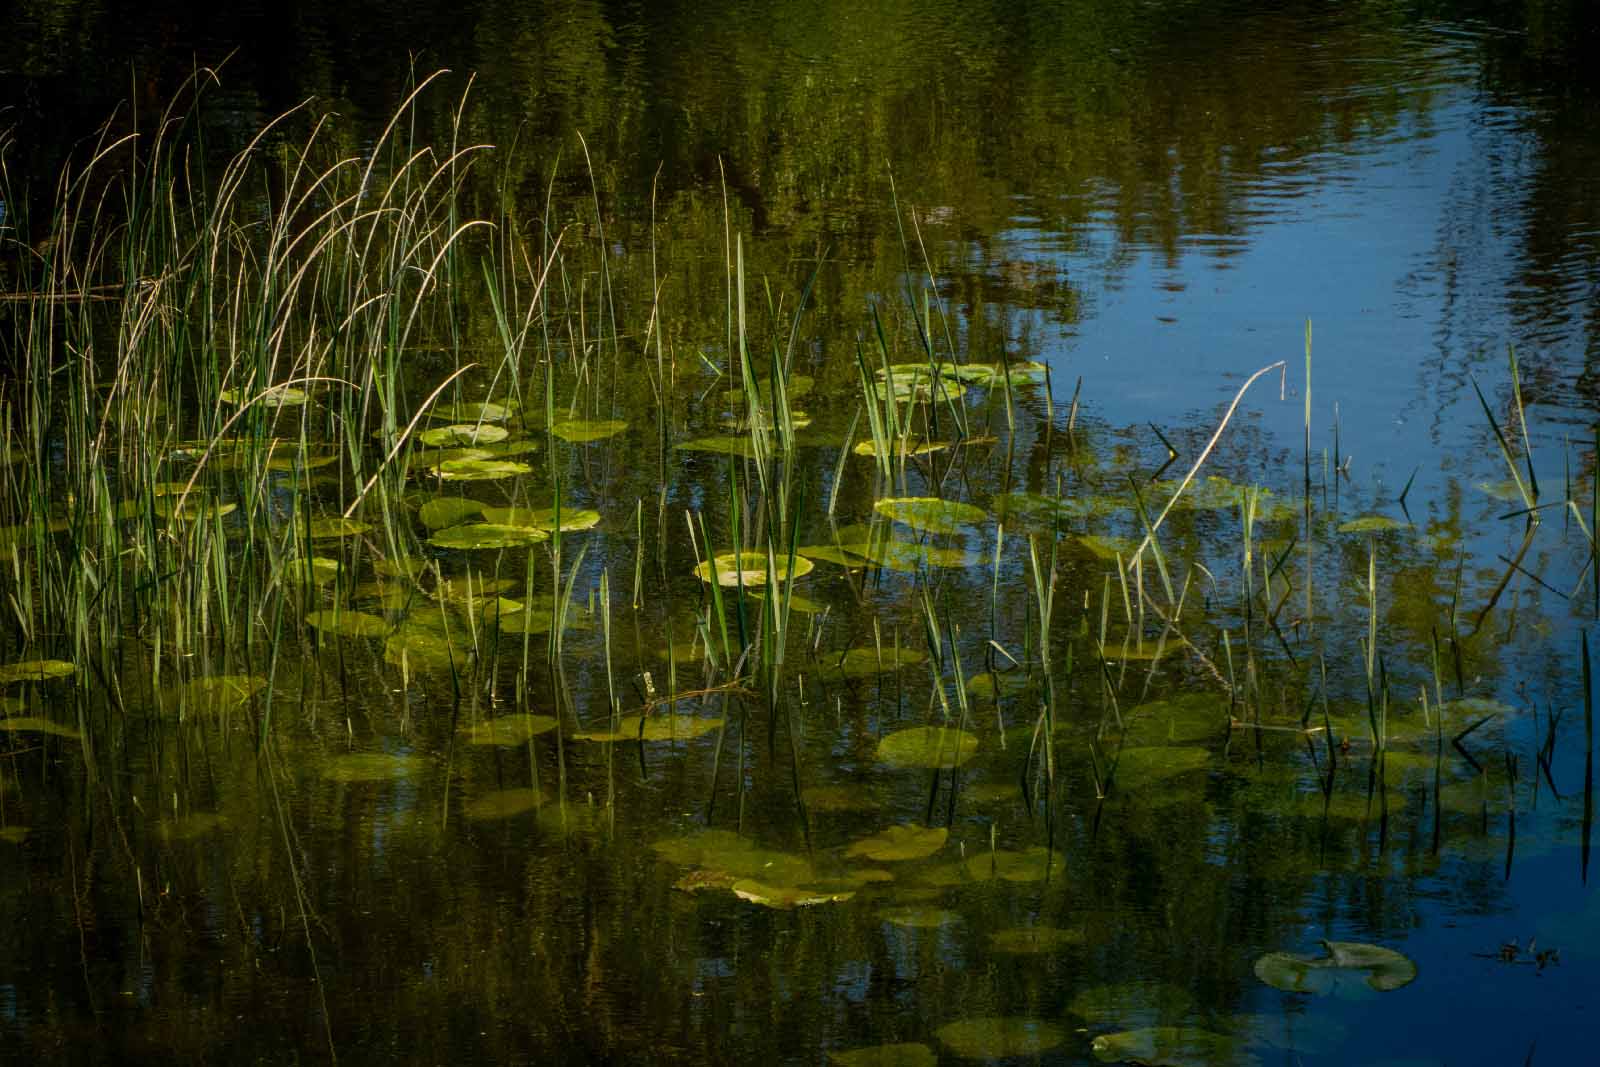 Lily pads at the edge of a pond